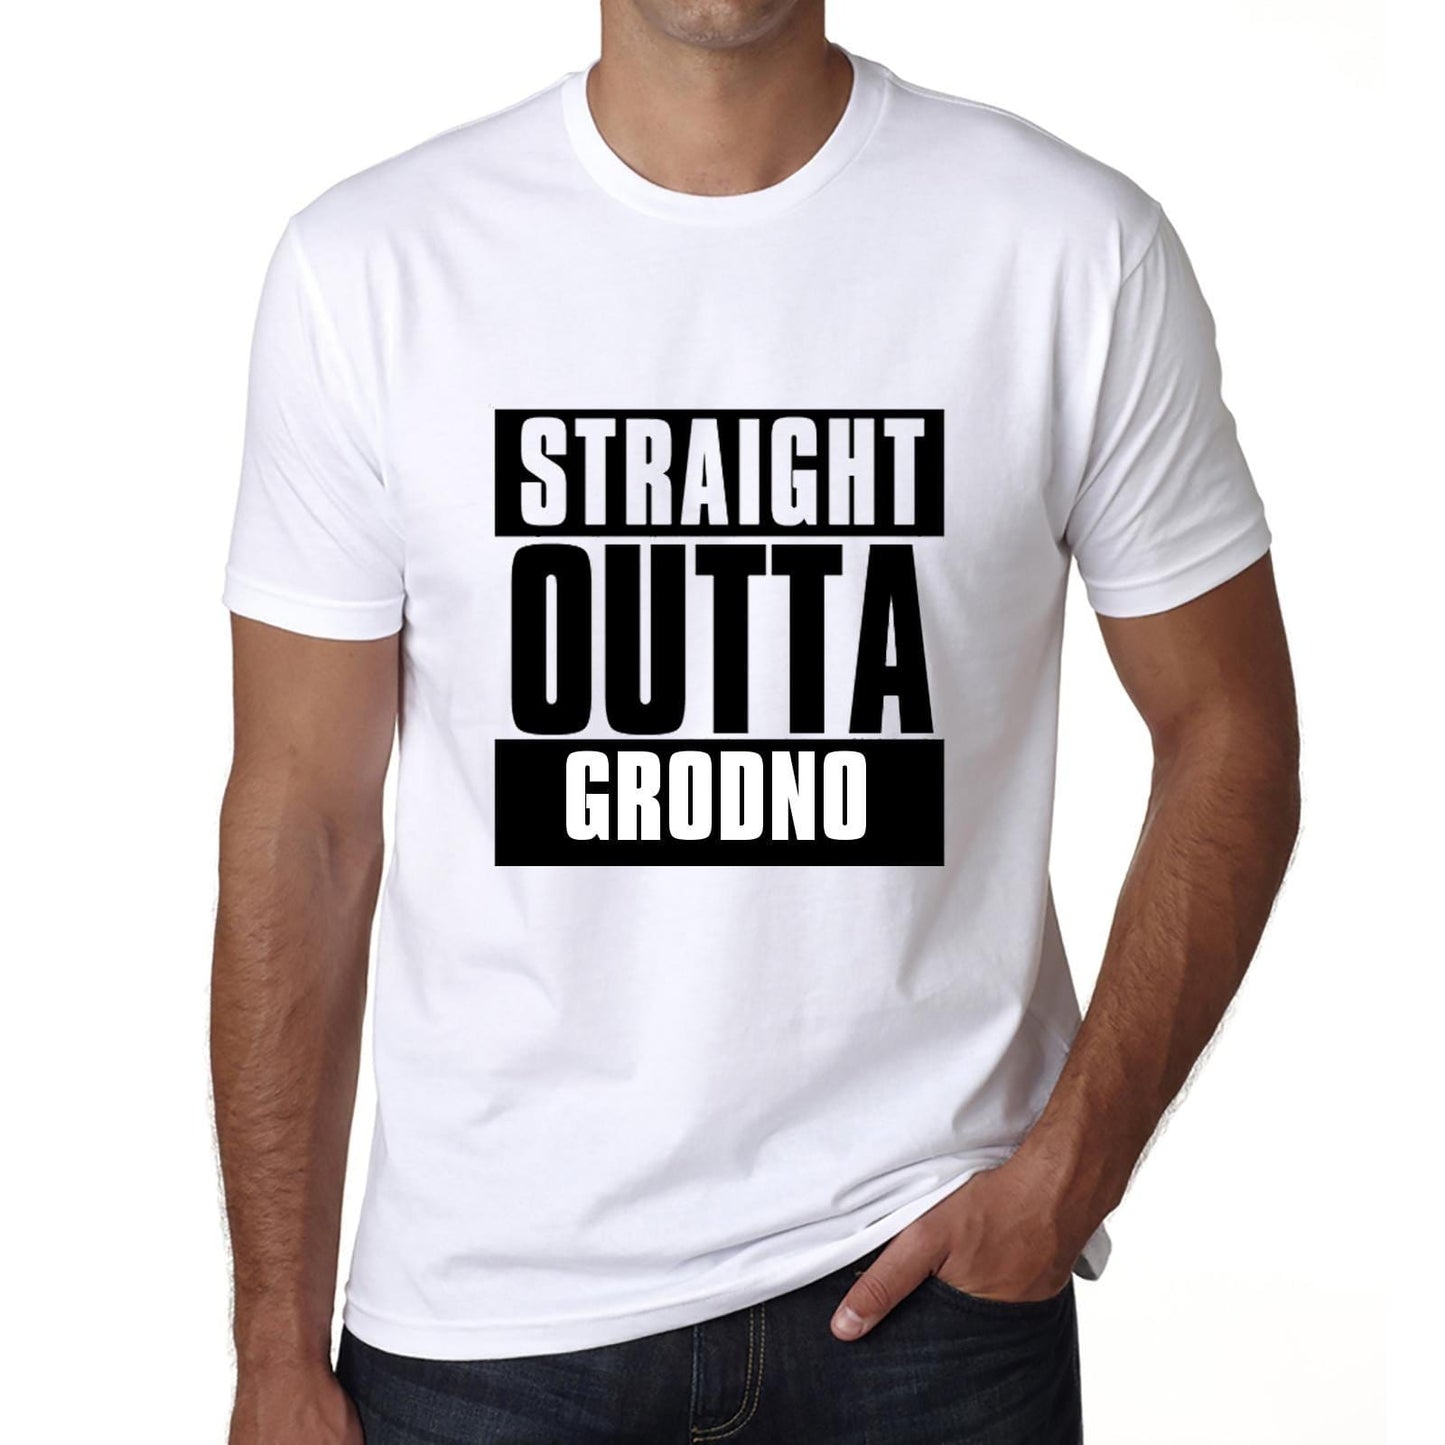 Straight Outta Grodno, t Shirt Homme, t Shirt Straight Outta, Cadeau Homme